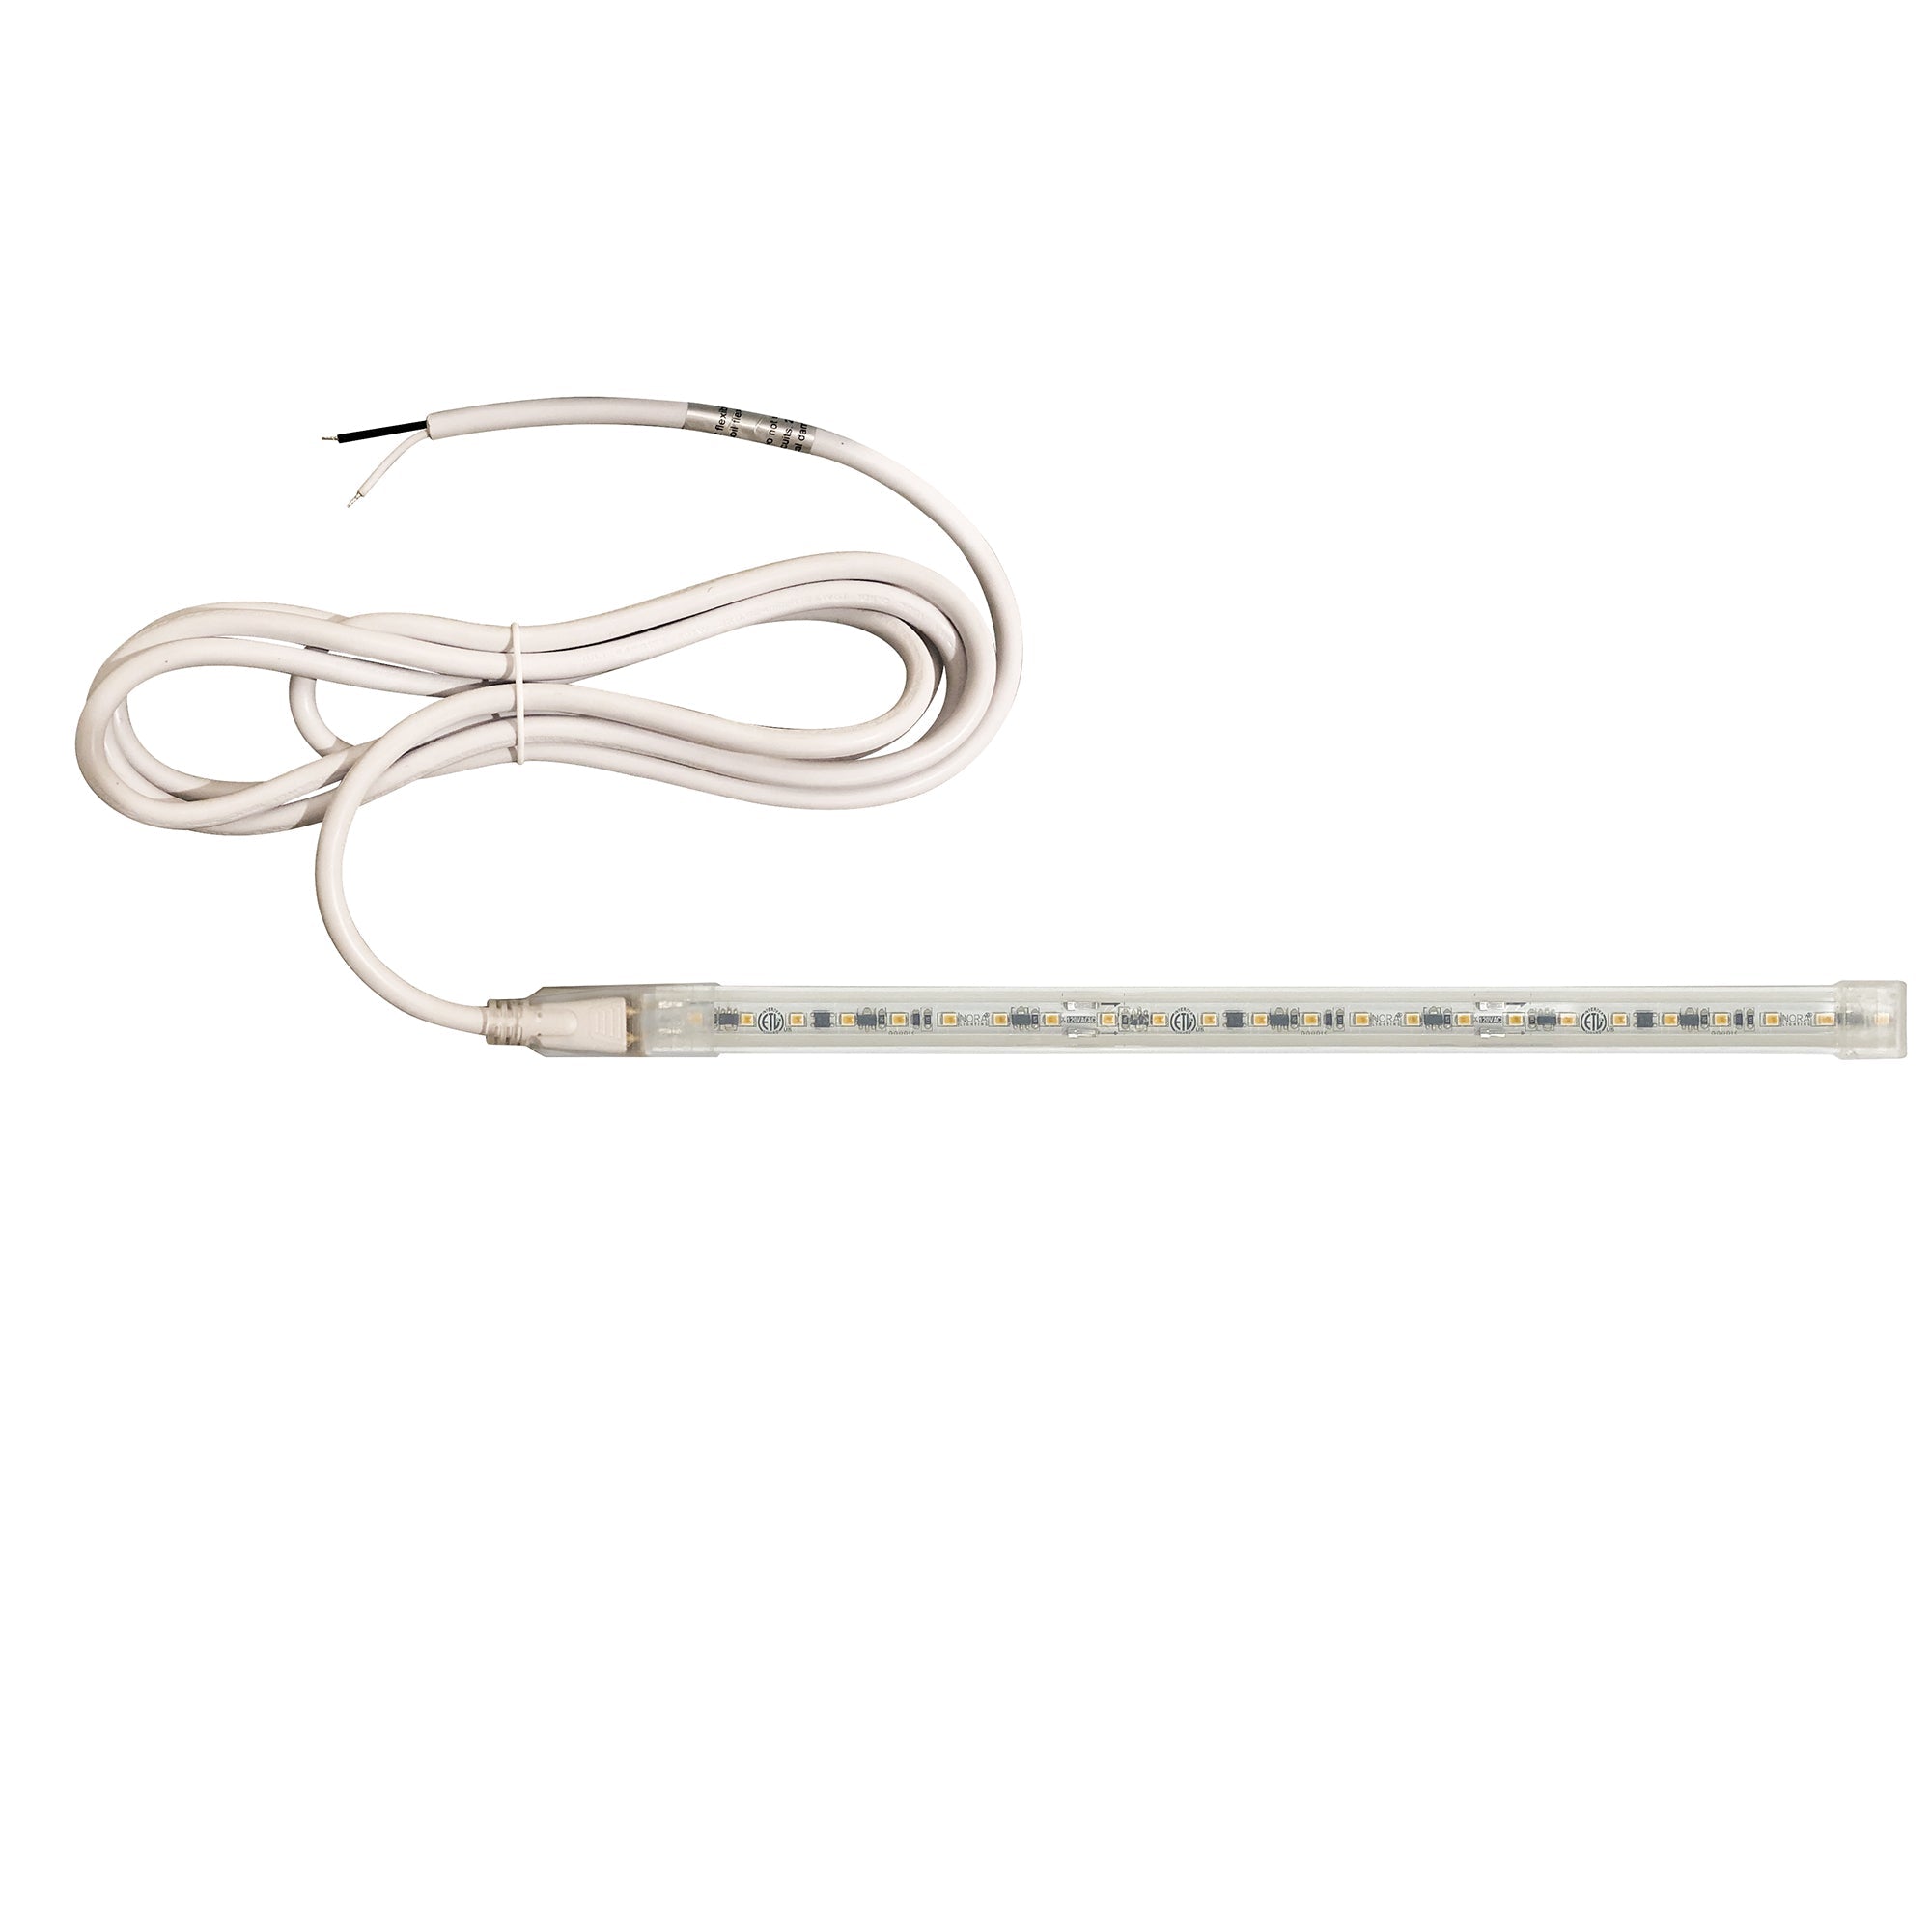 Nora Lighting NUTP13-W96-4-12-930/HW - Accent / Undercabinet - Custom Cut 96-ft, 4-in 120V Continuous LED Tape Light, 330lm / 3.6W per foot, 3000K, w/ Mounting Clips and 8' Hardwired Power Cord